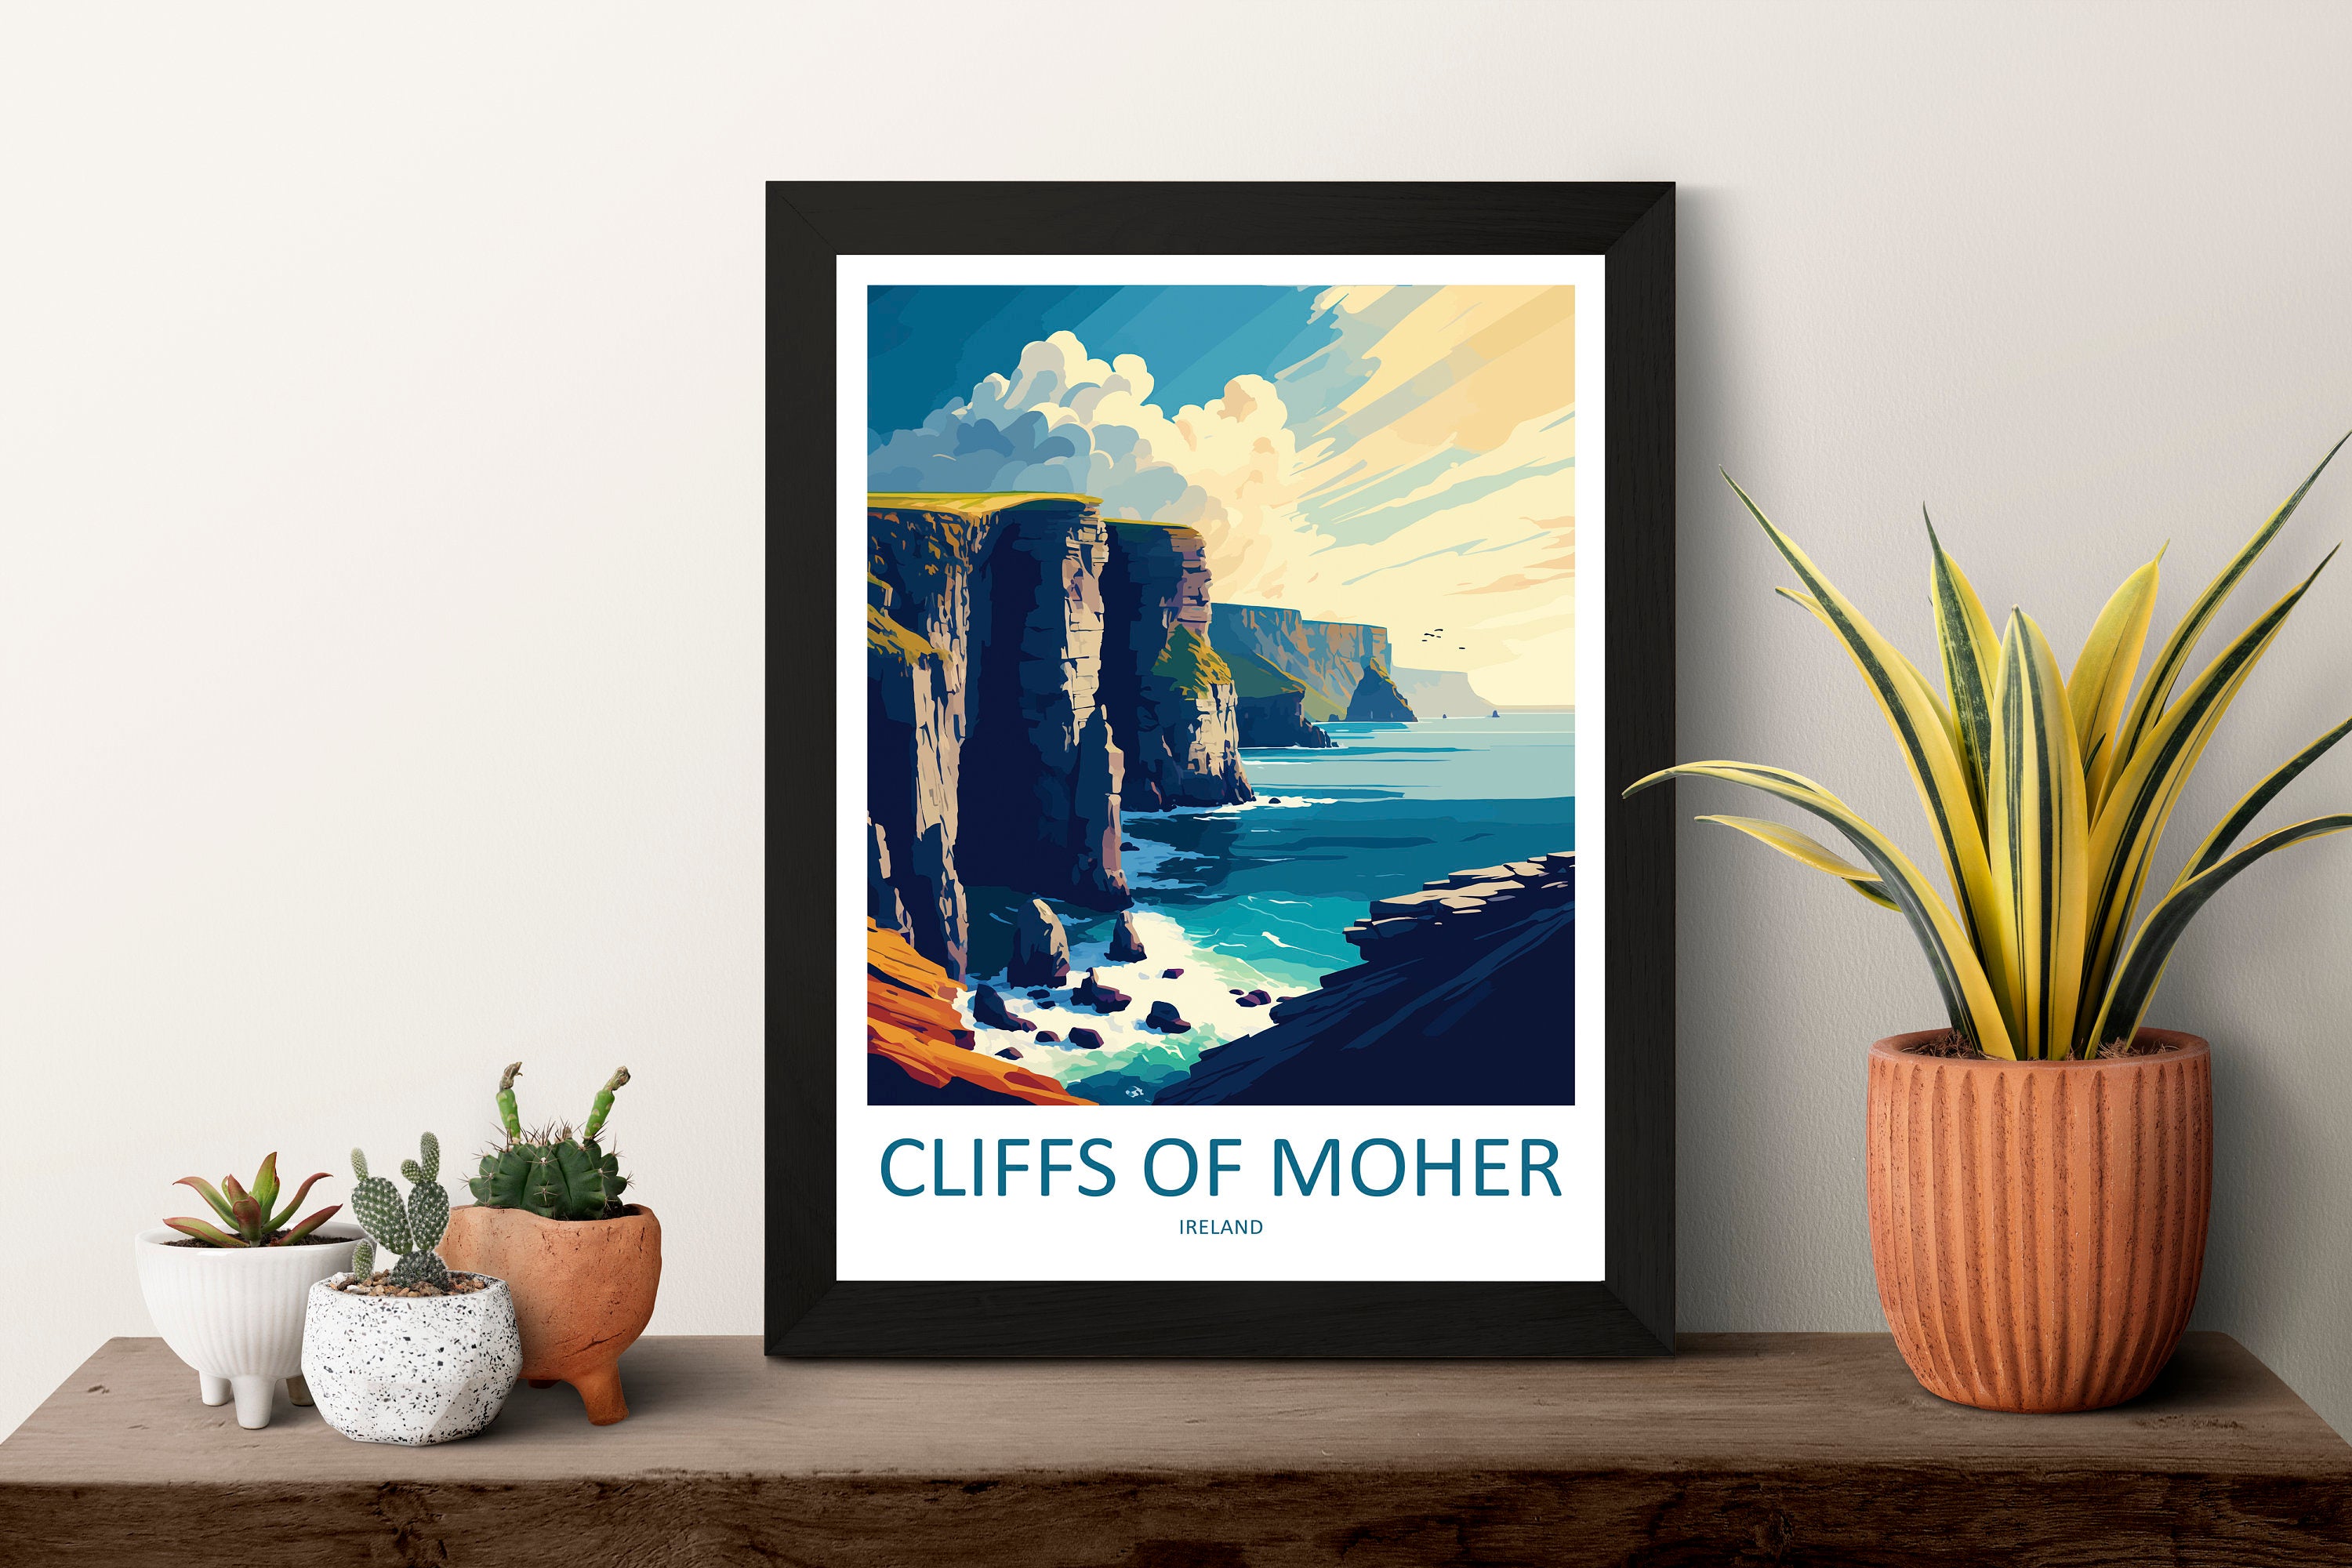 Cliffs of Moher Print Cliffs of Moher Home Décor Landscape Art Print Cliffs of Moher Wall Art for Ireland Enthusiast Gift Wall Hanging Art